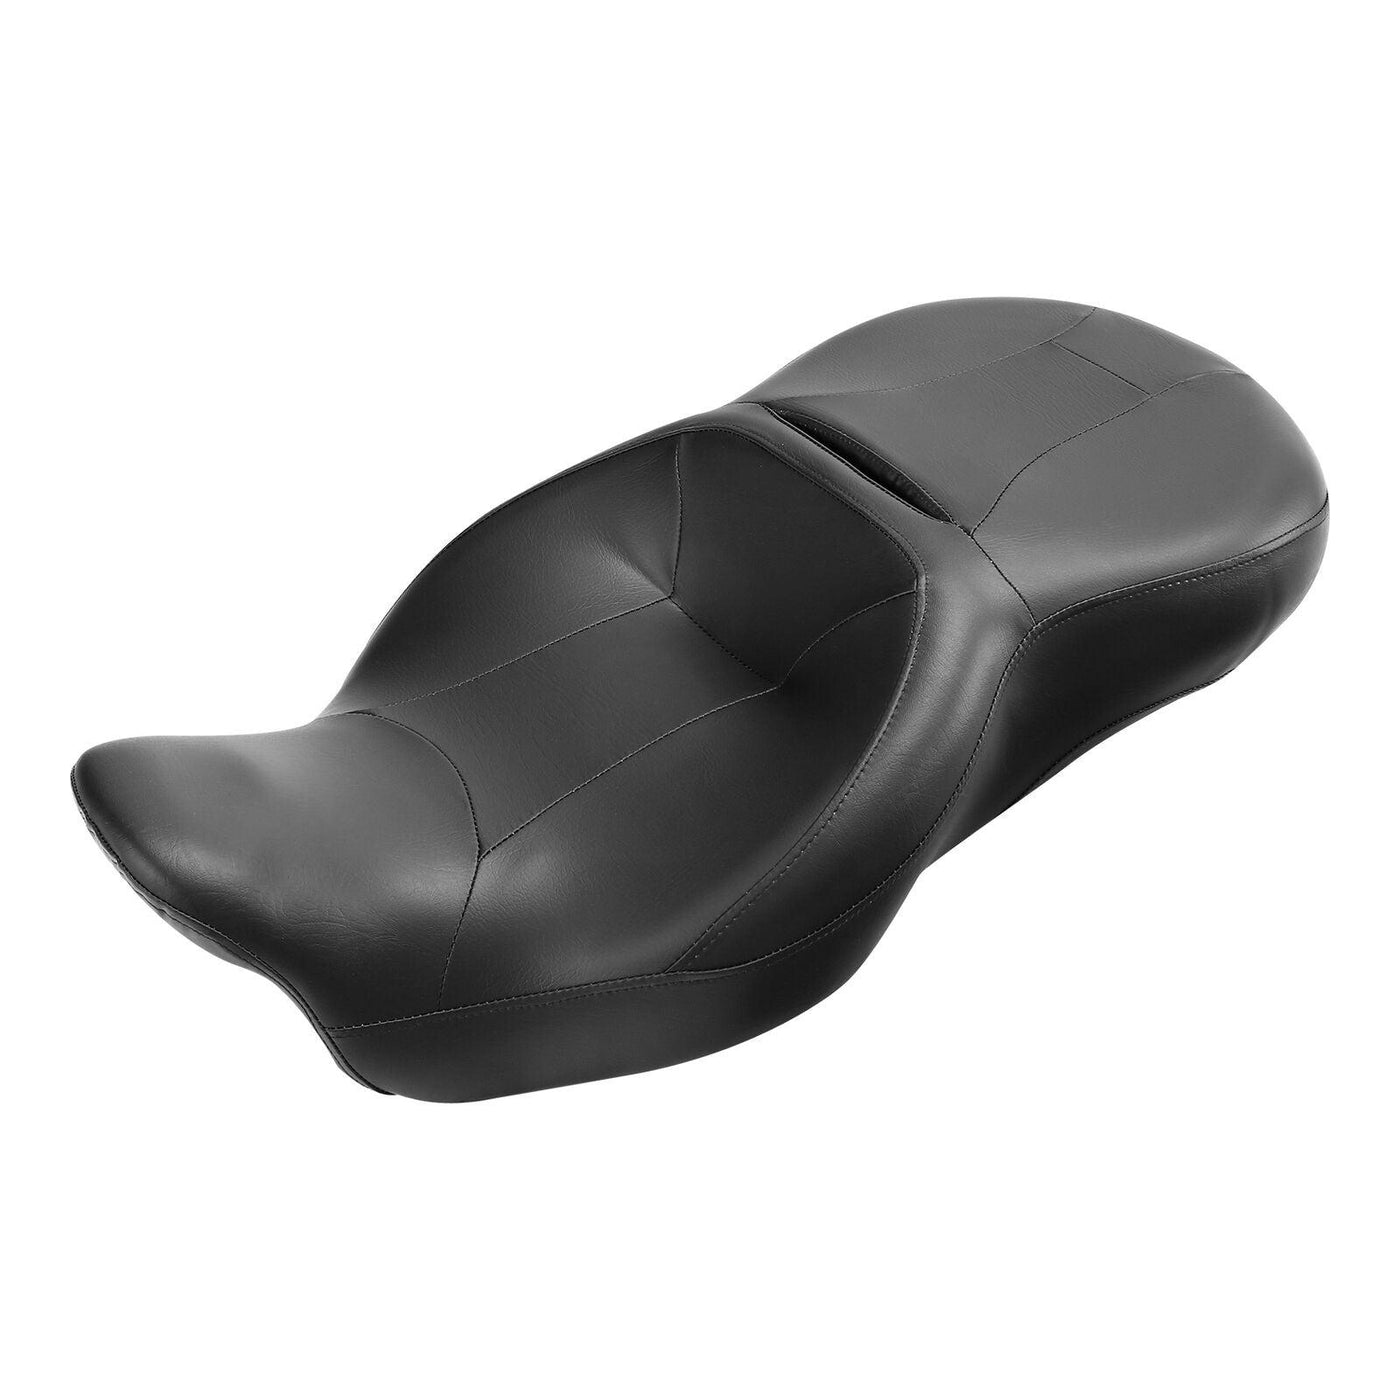 Black Rider Driver Passenger Seat Fit For Harley Road Electra Glide FLHTCU 09-22 - Moto Life Products